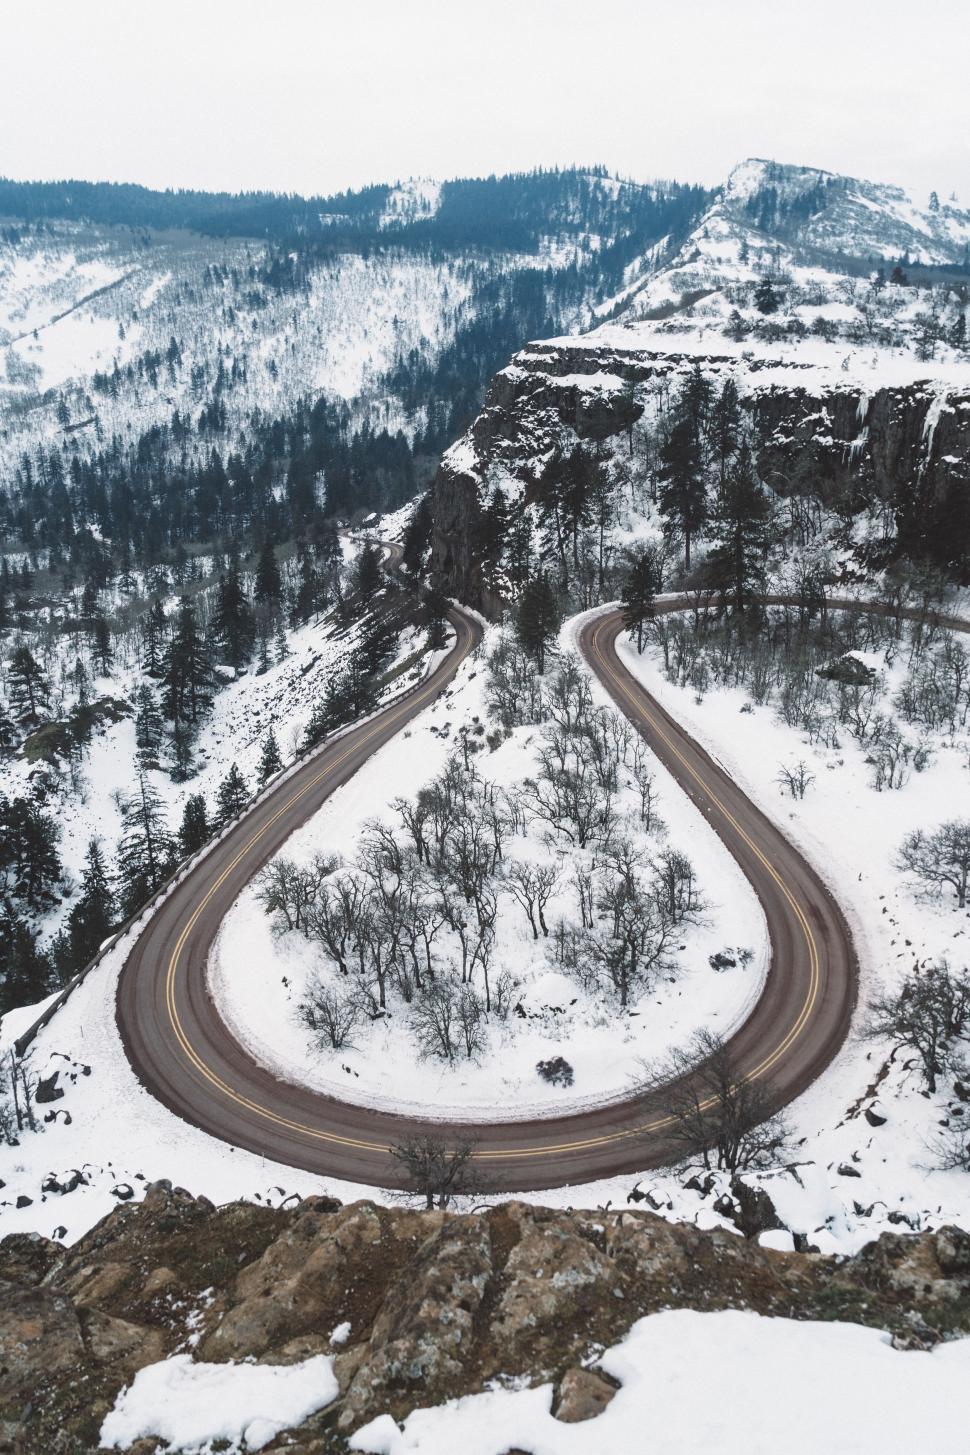 Free Image of Snow-Covered Winding Road in the Mountains 